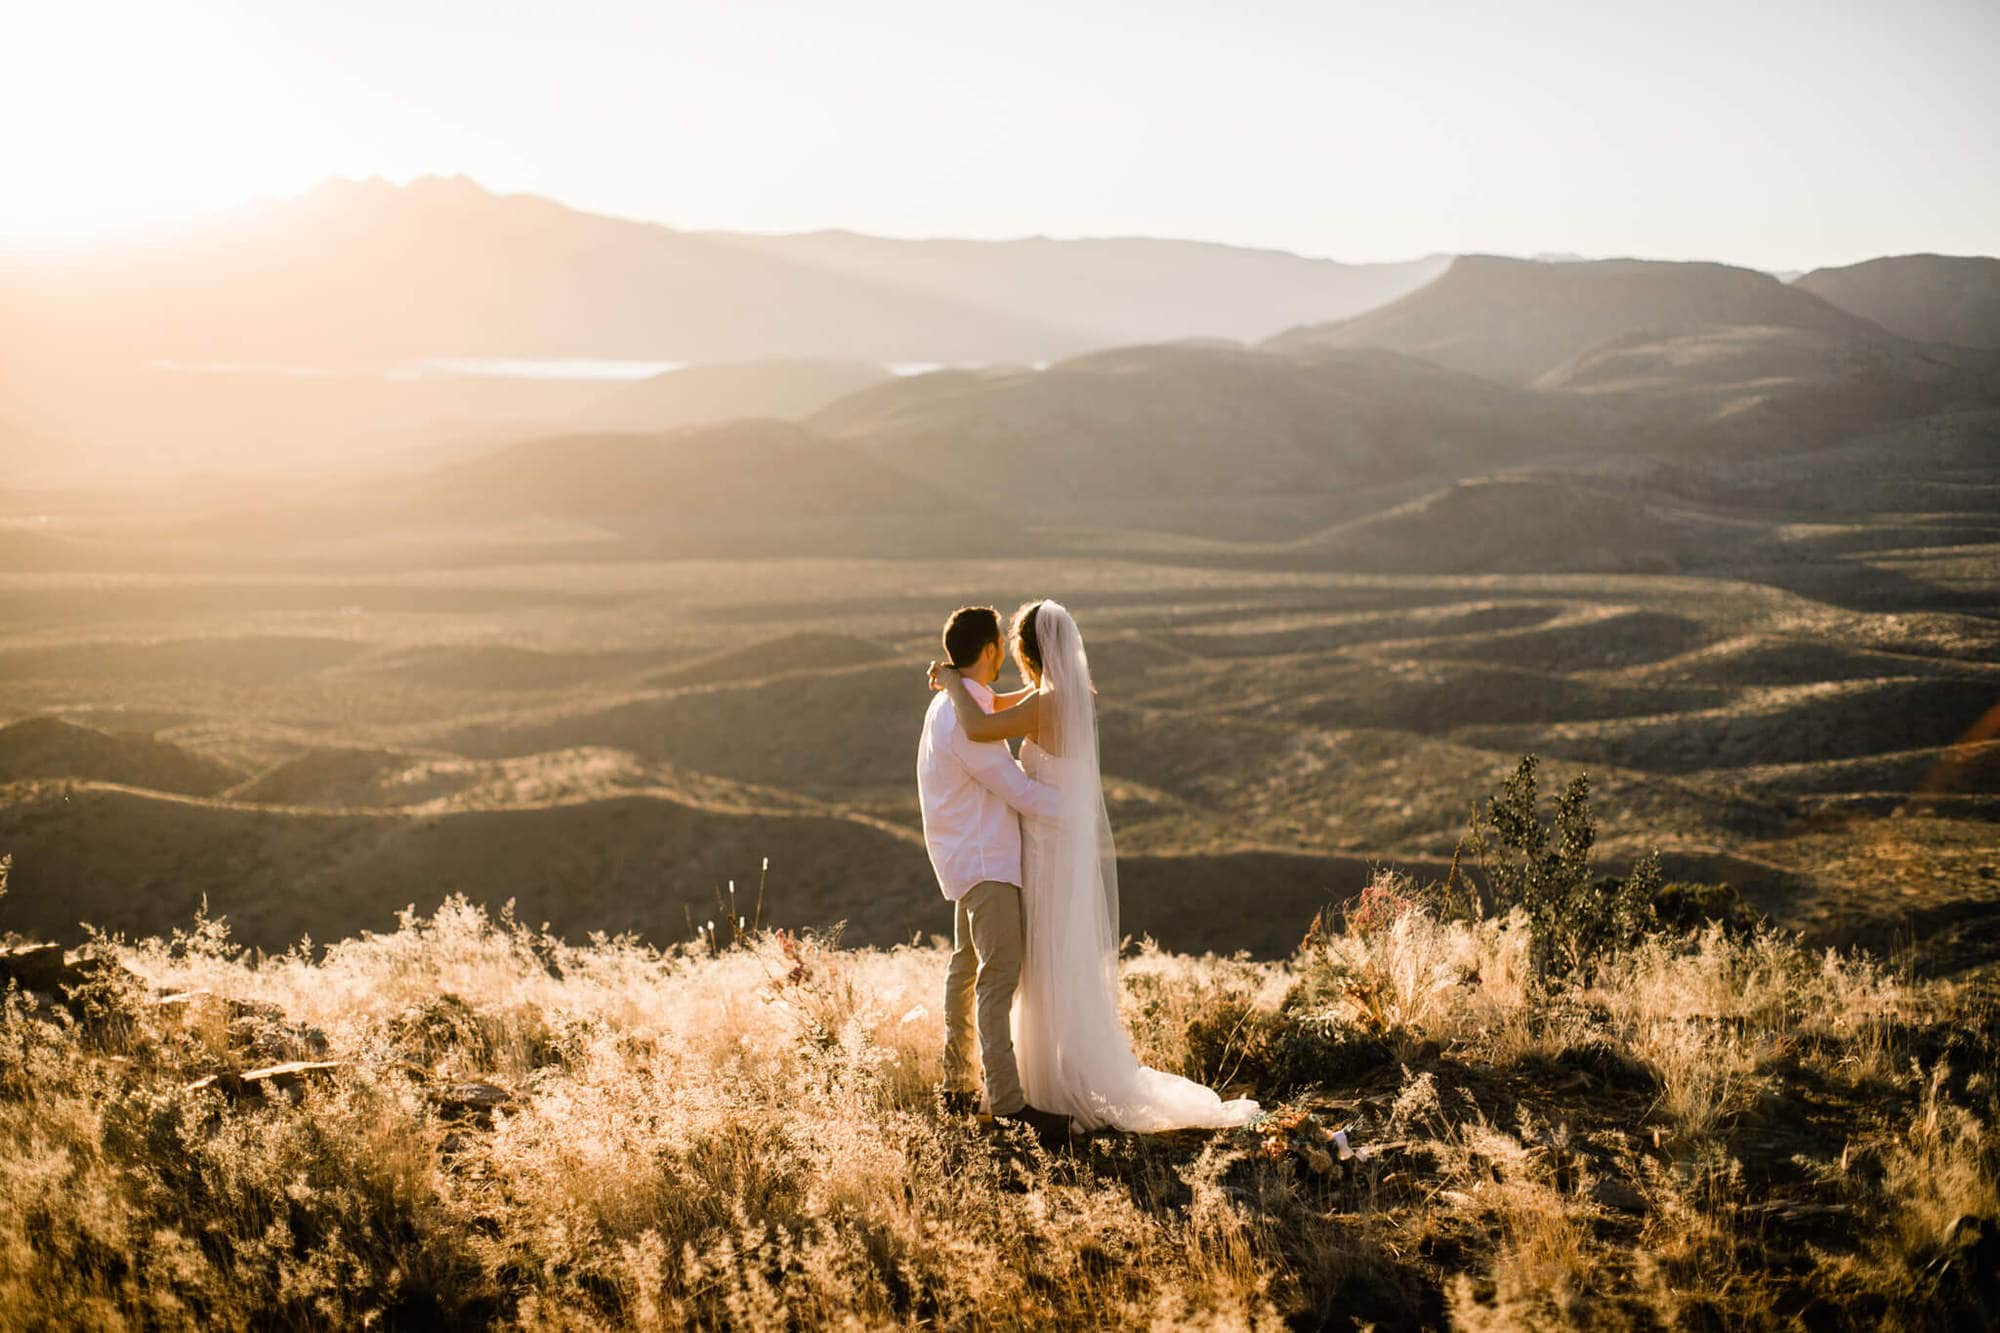 During their elopement in the desert, the bride and groom look out into the sunlit valley before they say their vows.